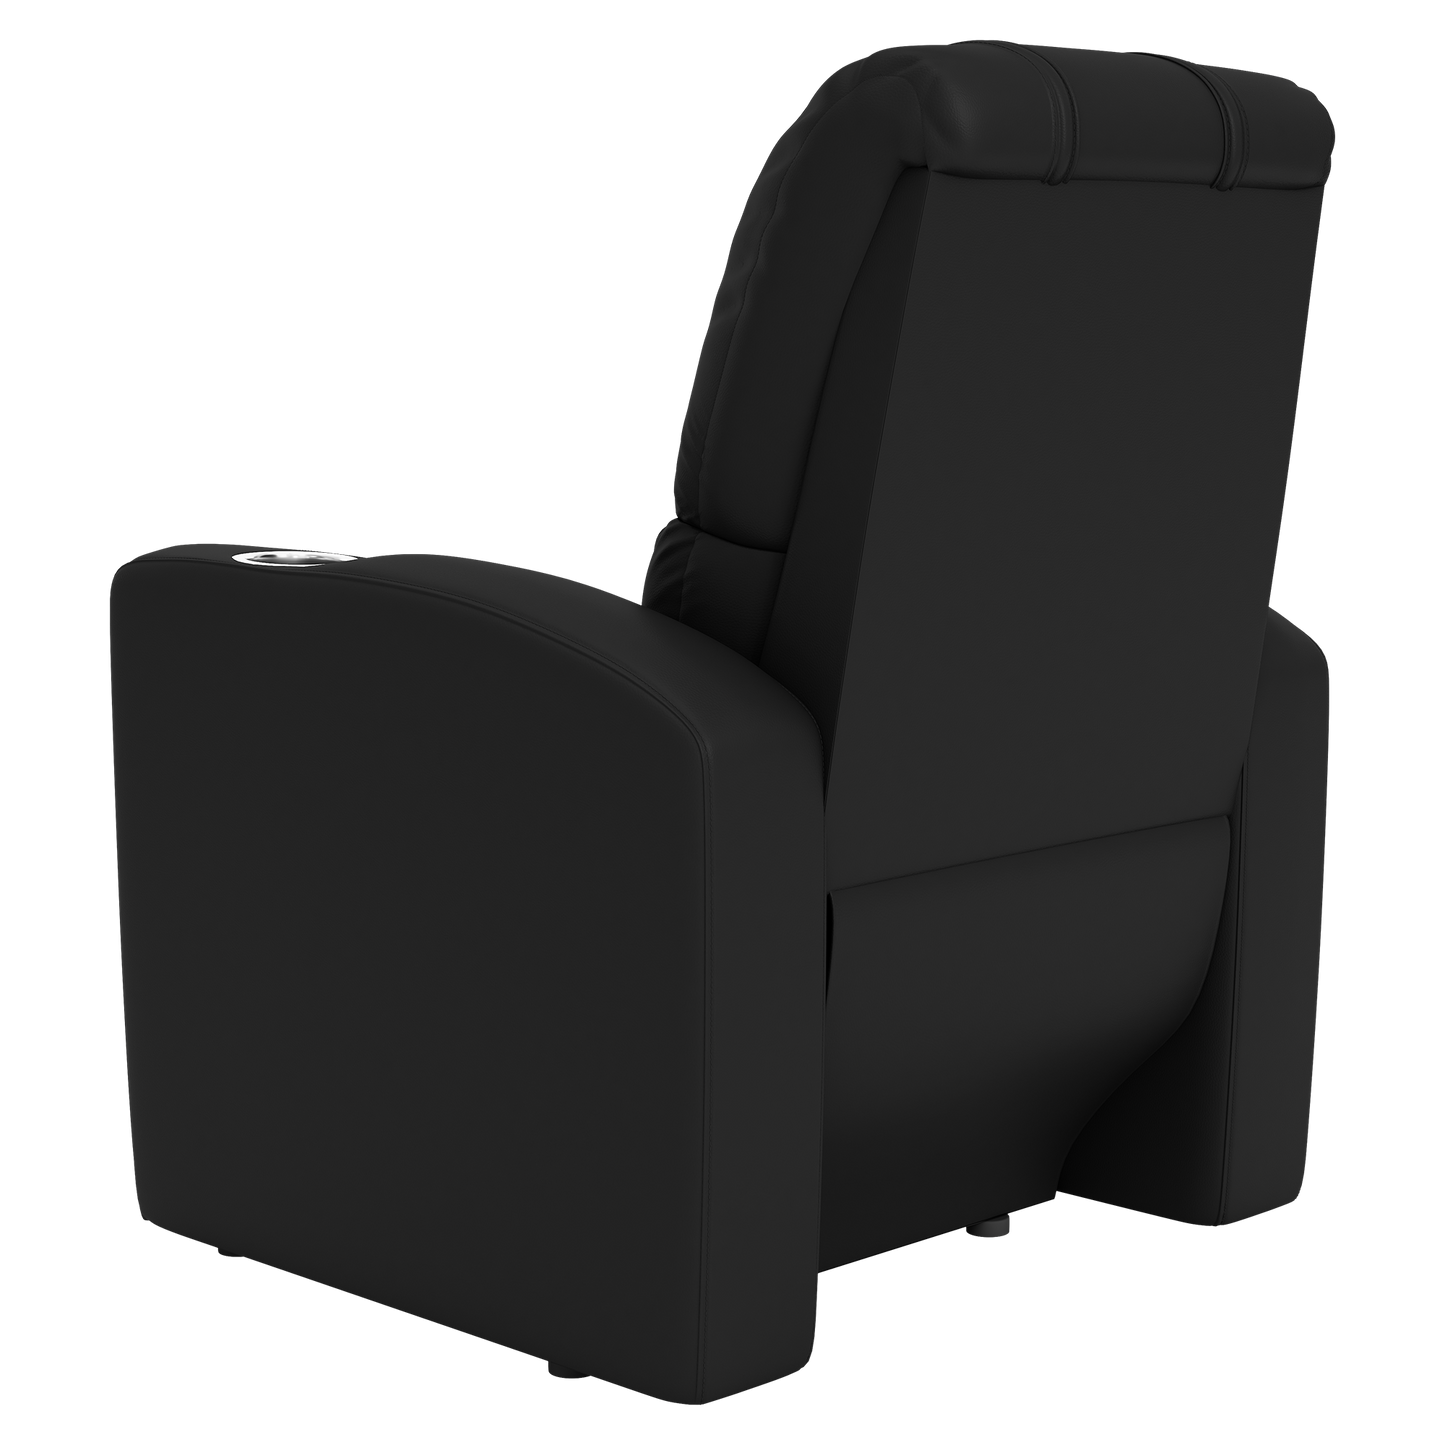 Stealth Recliner with Zappers Logo